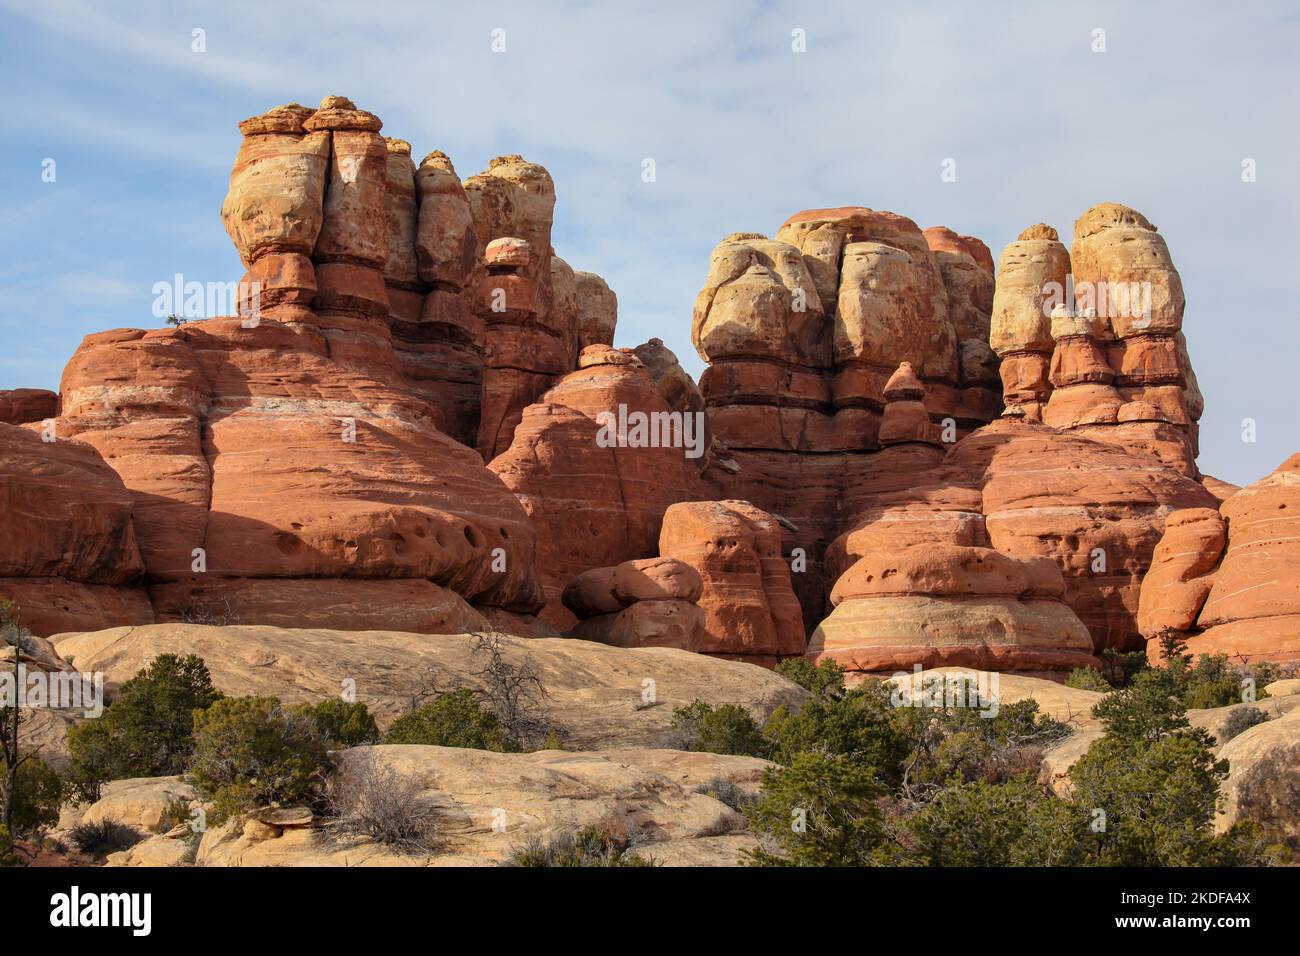 The Needles Trail in Canyonlands National Park, Utah. Stock Photo